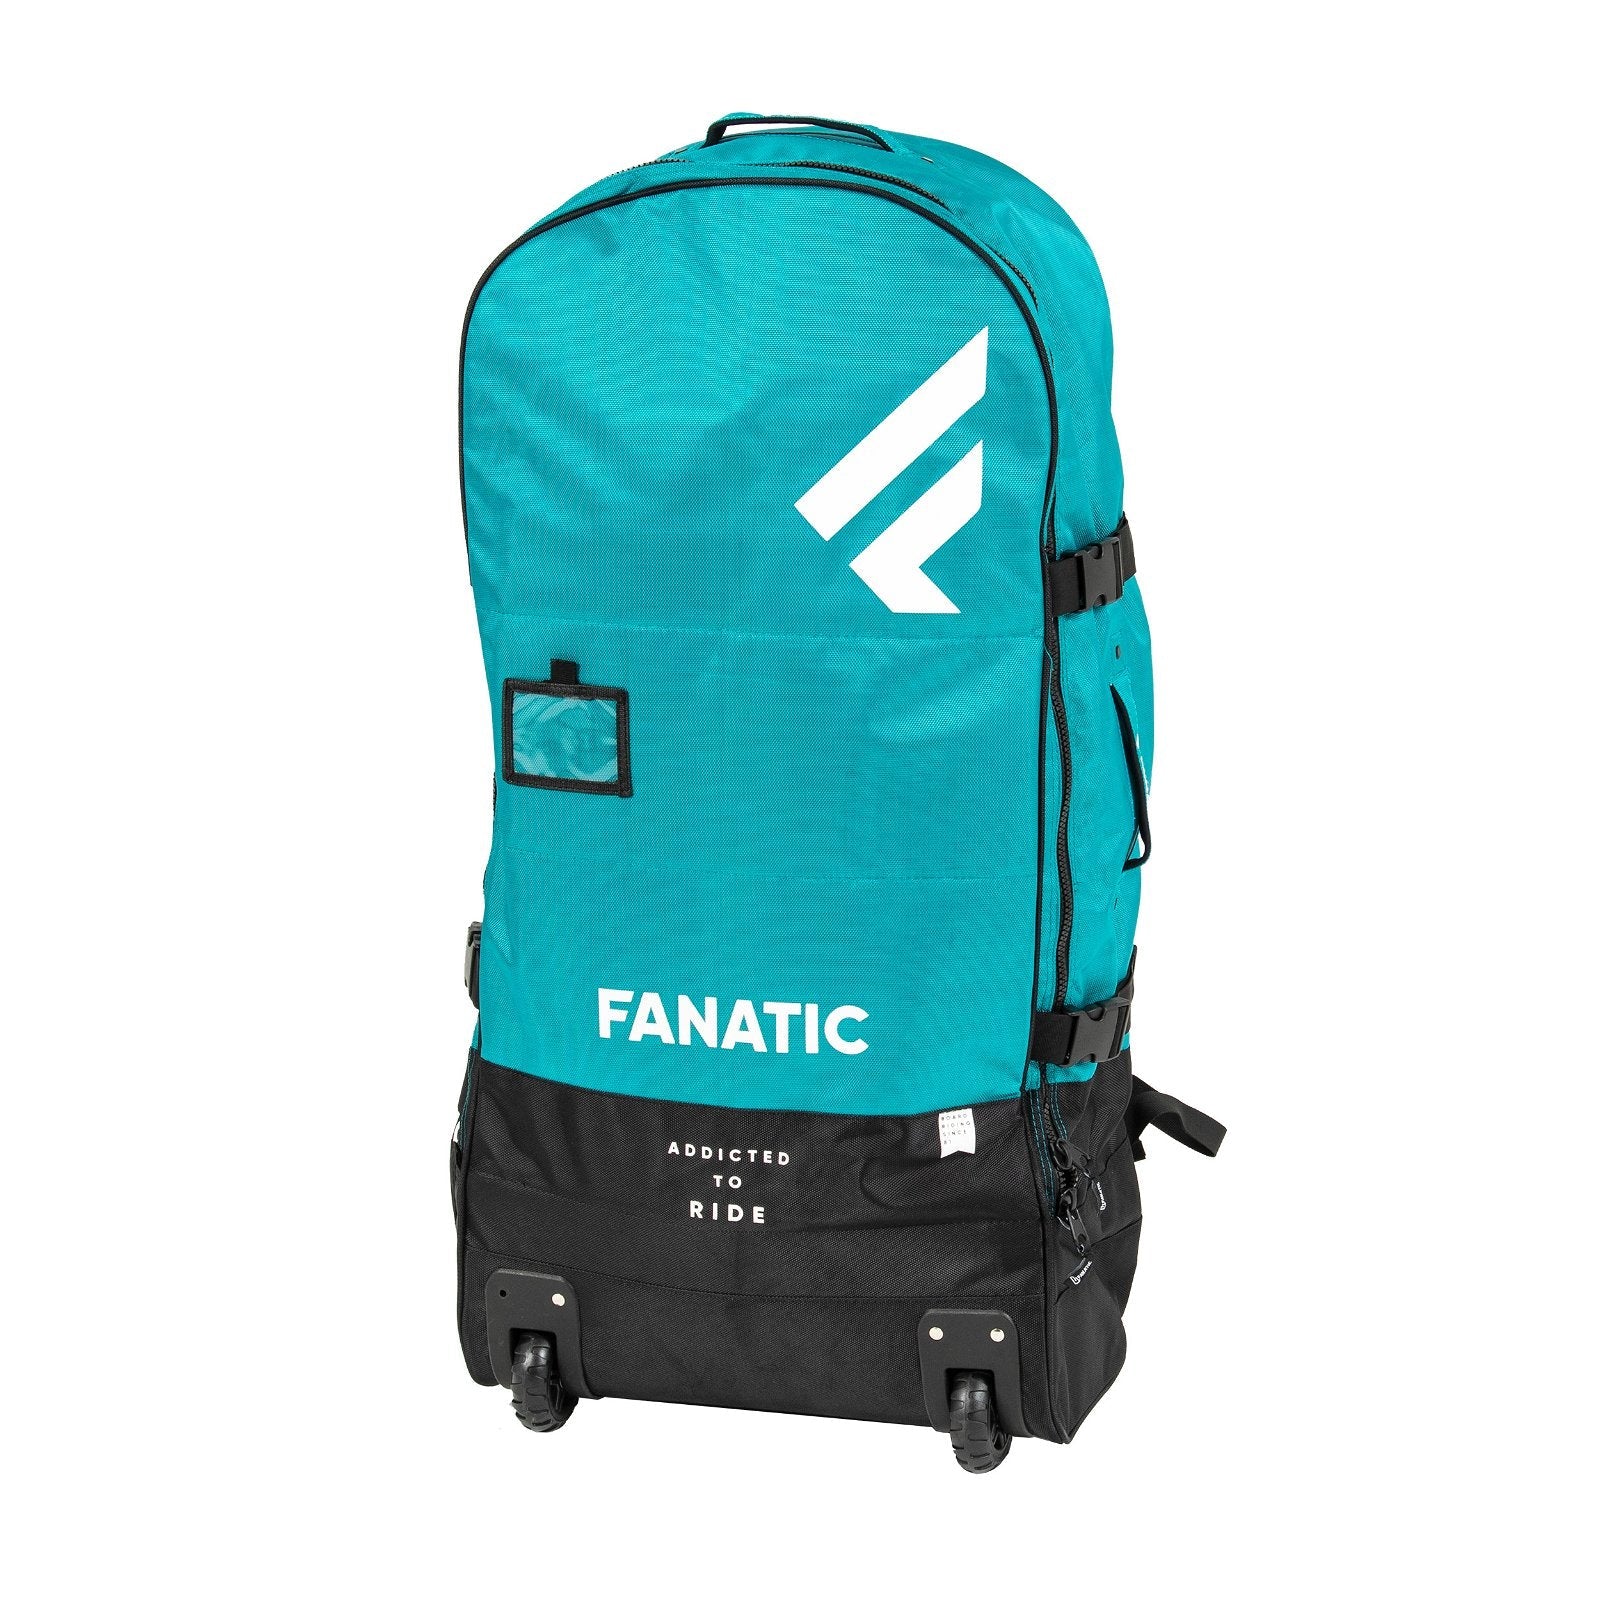 FANATIC Gearbag Fly Air Platform 2024-Fanatic SUP-110x55cm-turquoise-13200-7004-9008415928088-Surf-store.com